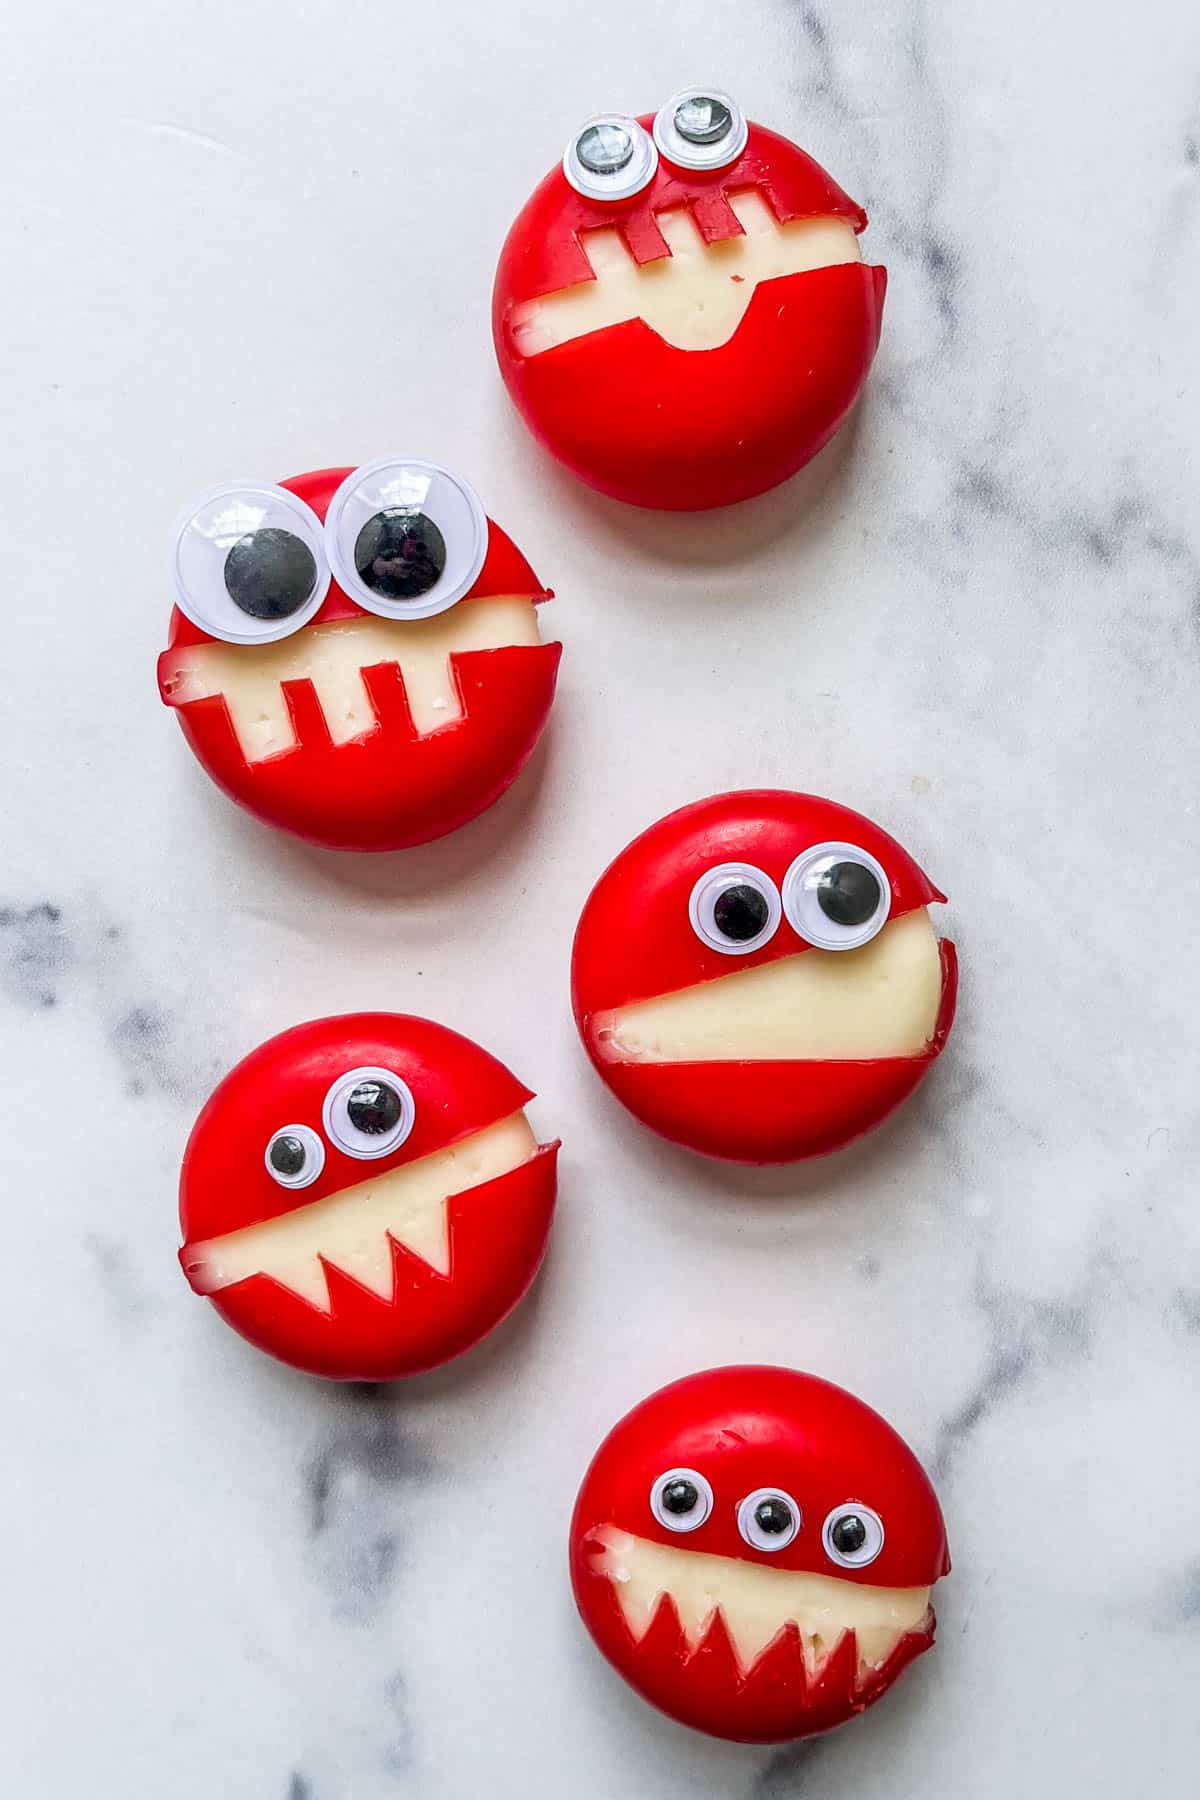 Cheese monsters with googly eyes in a line.